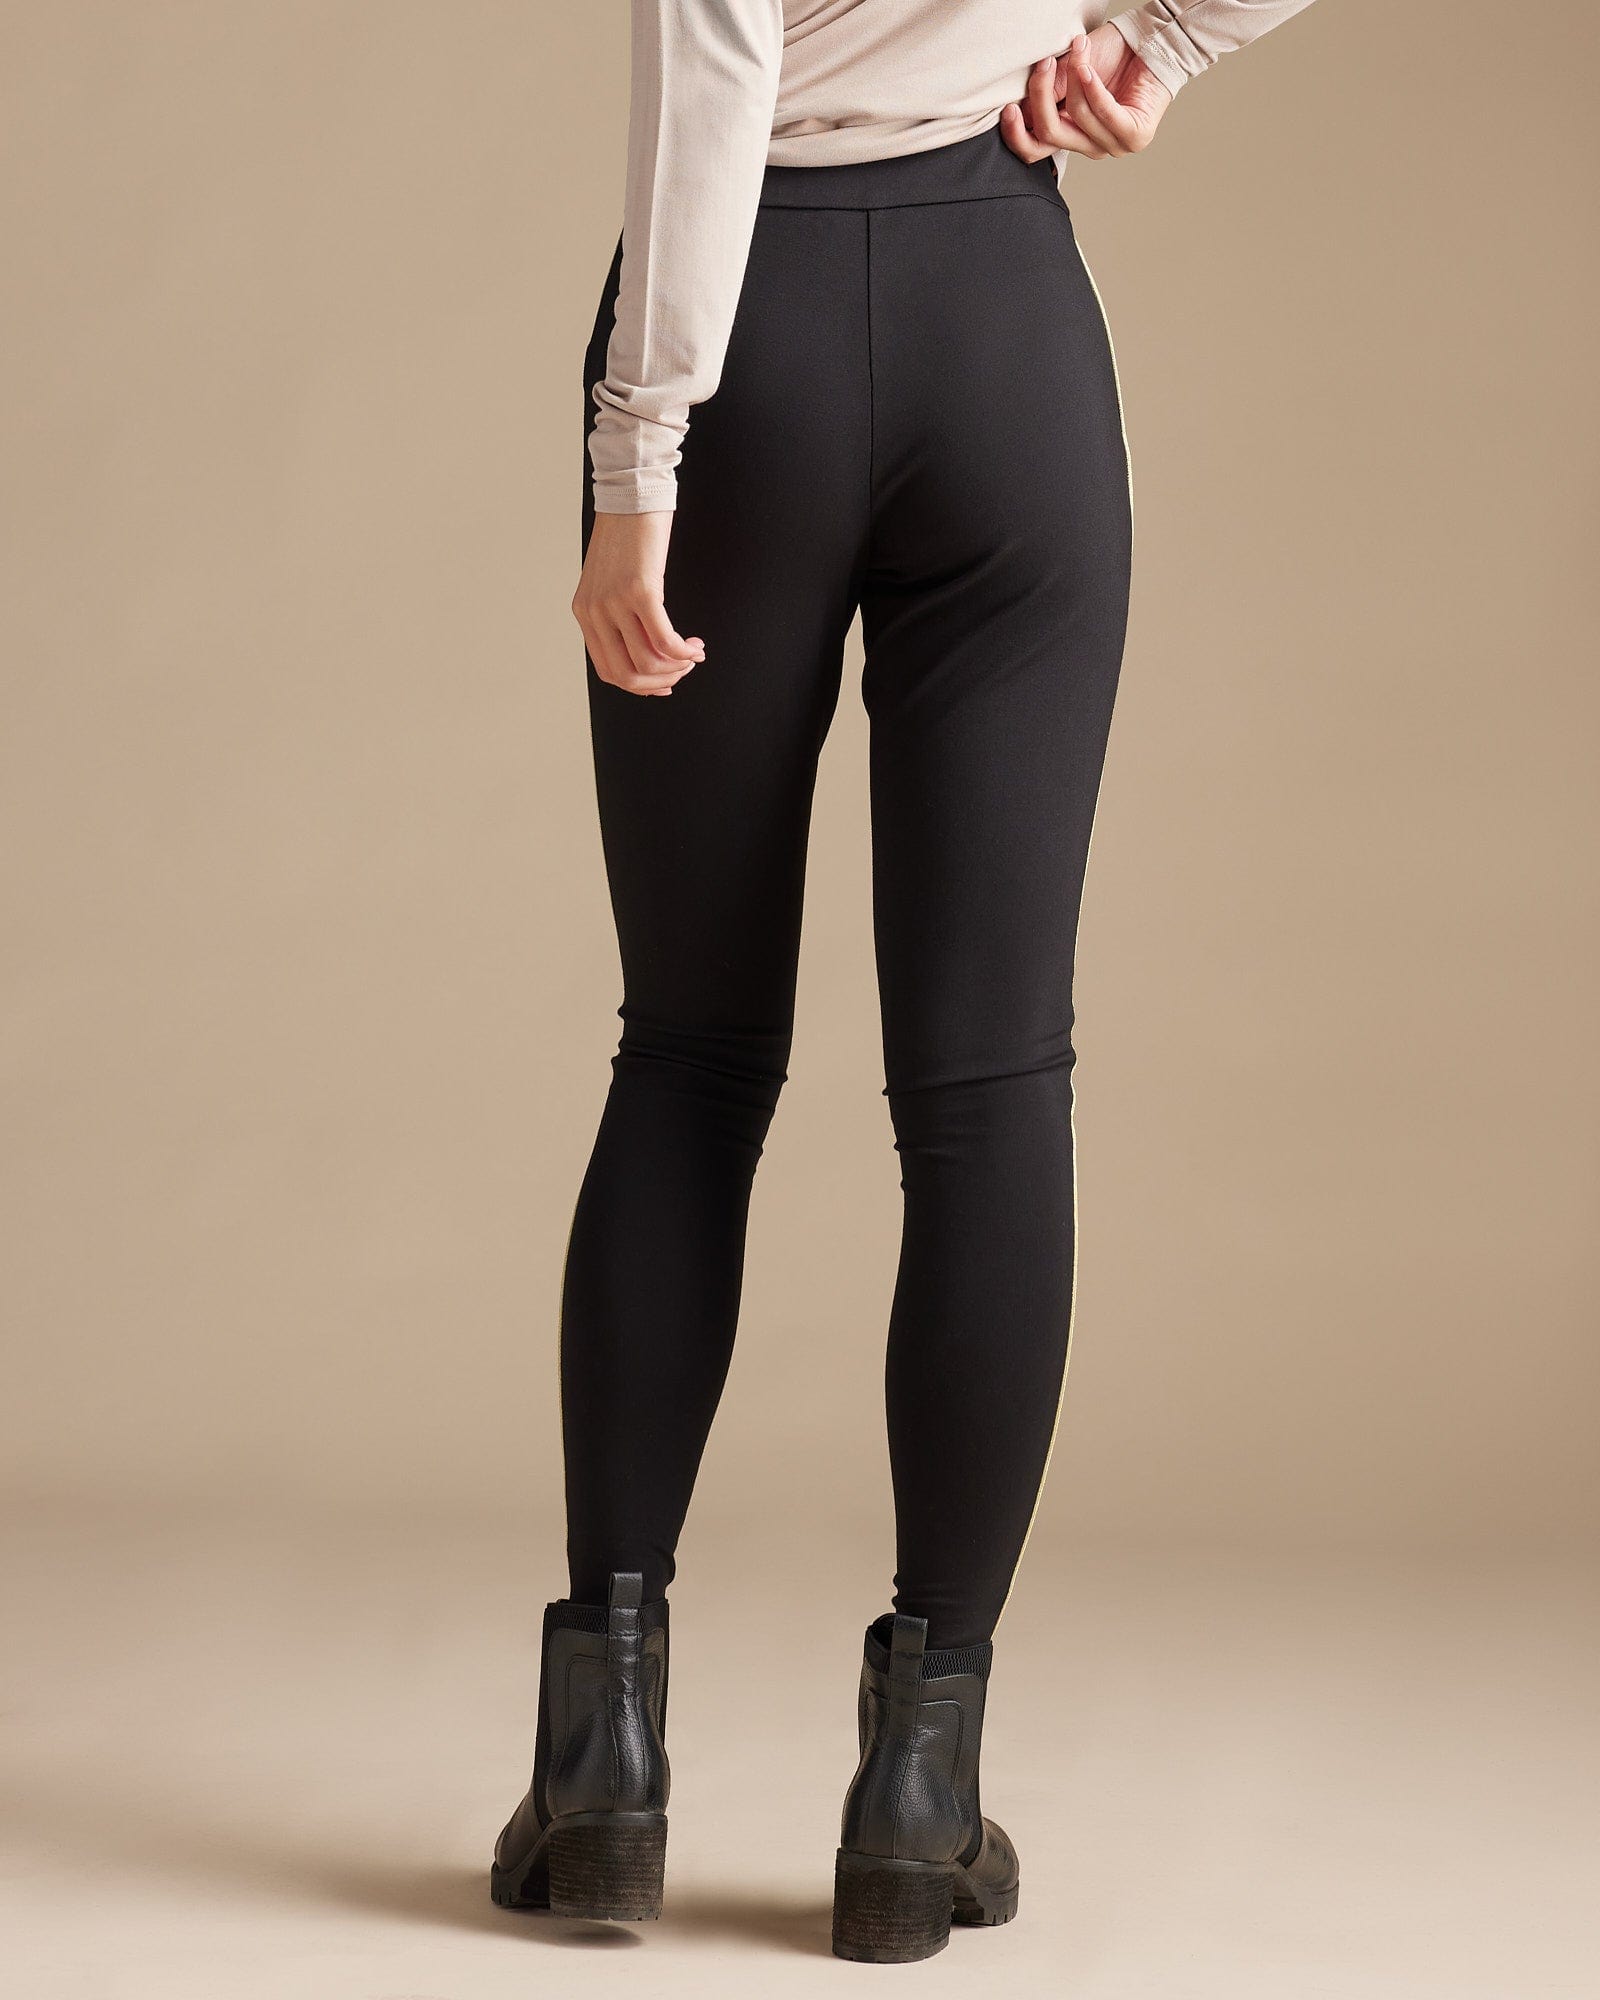 Woman in black leggings with gold piping along sides